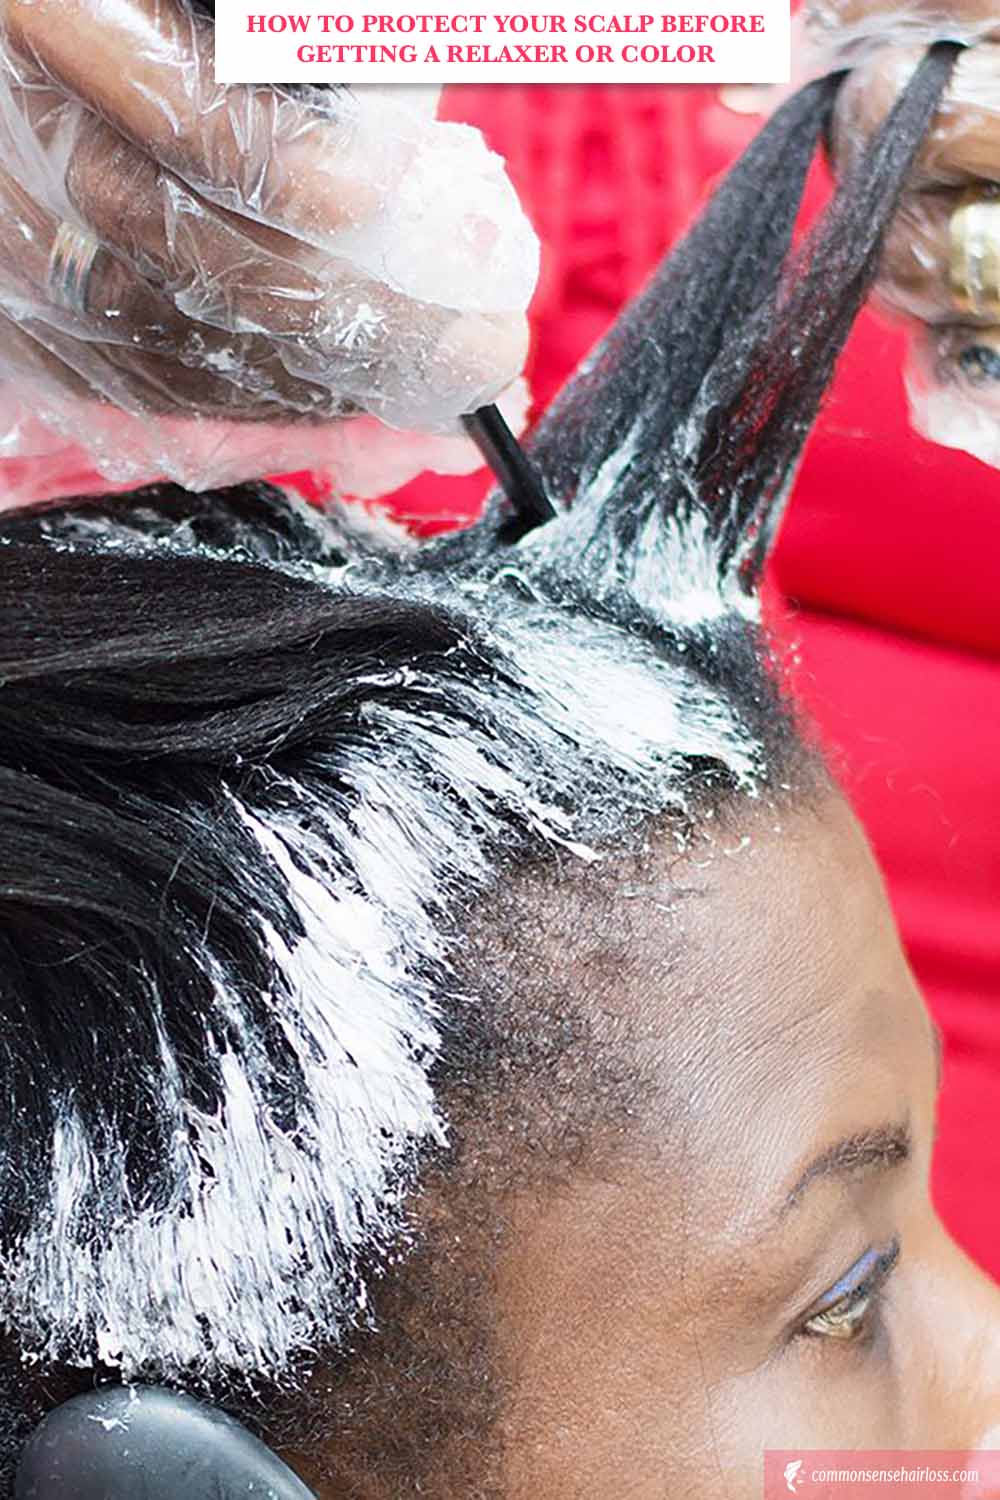 How To Protect Your Scalp Before Getting A Relaxer Or Color